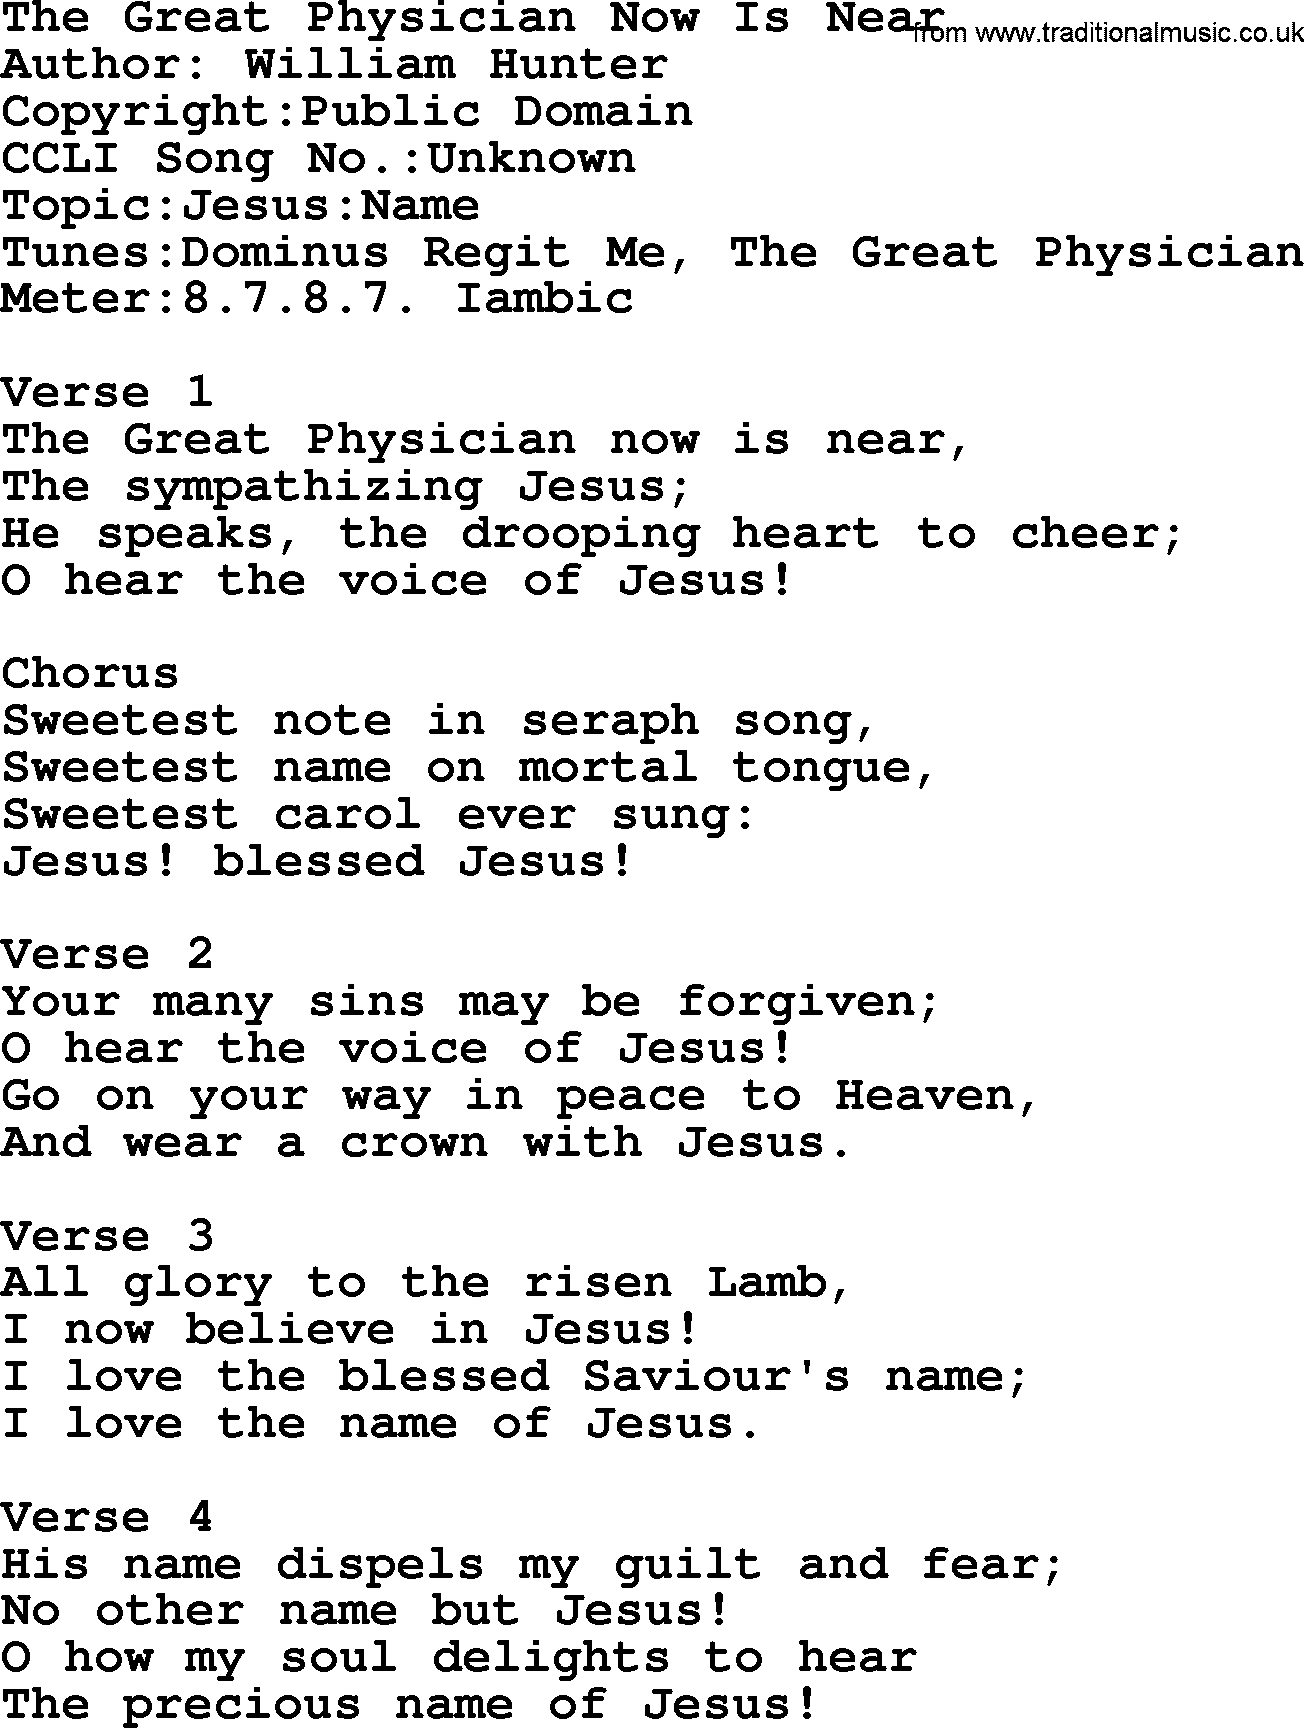 A collection of 500+ most sung Christian church hymns and songs, title: The Great Physician Now Is Near, lyrics, PPTX and PDF